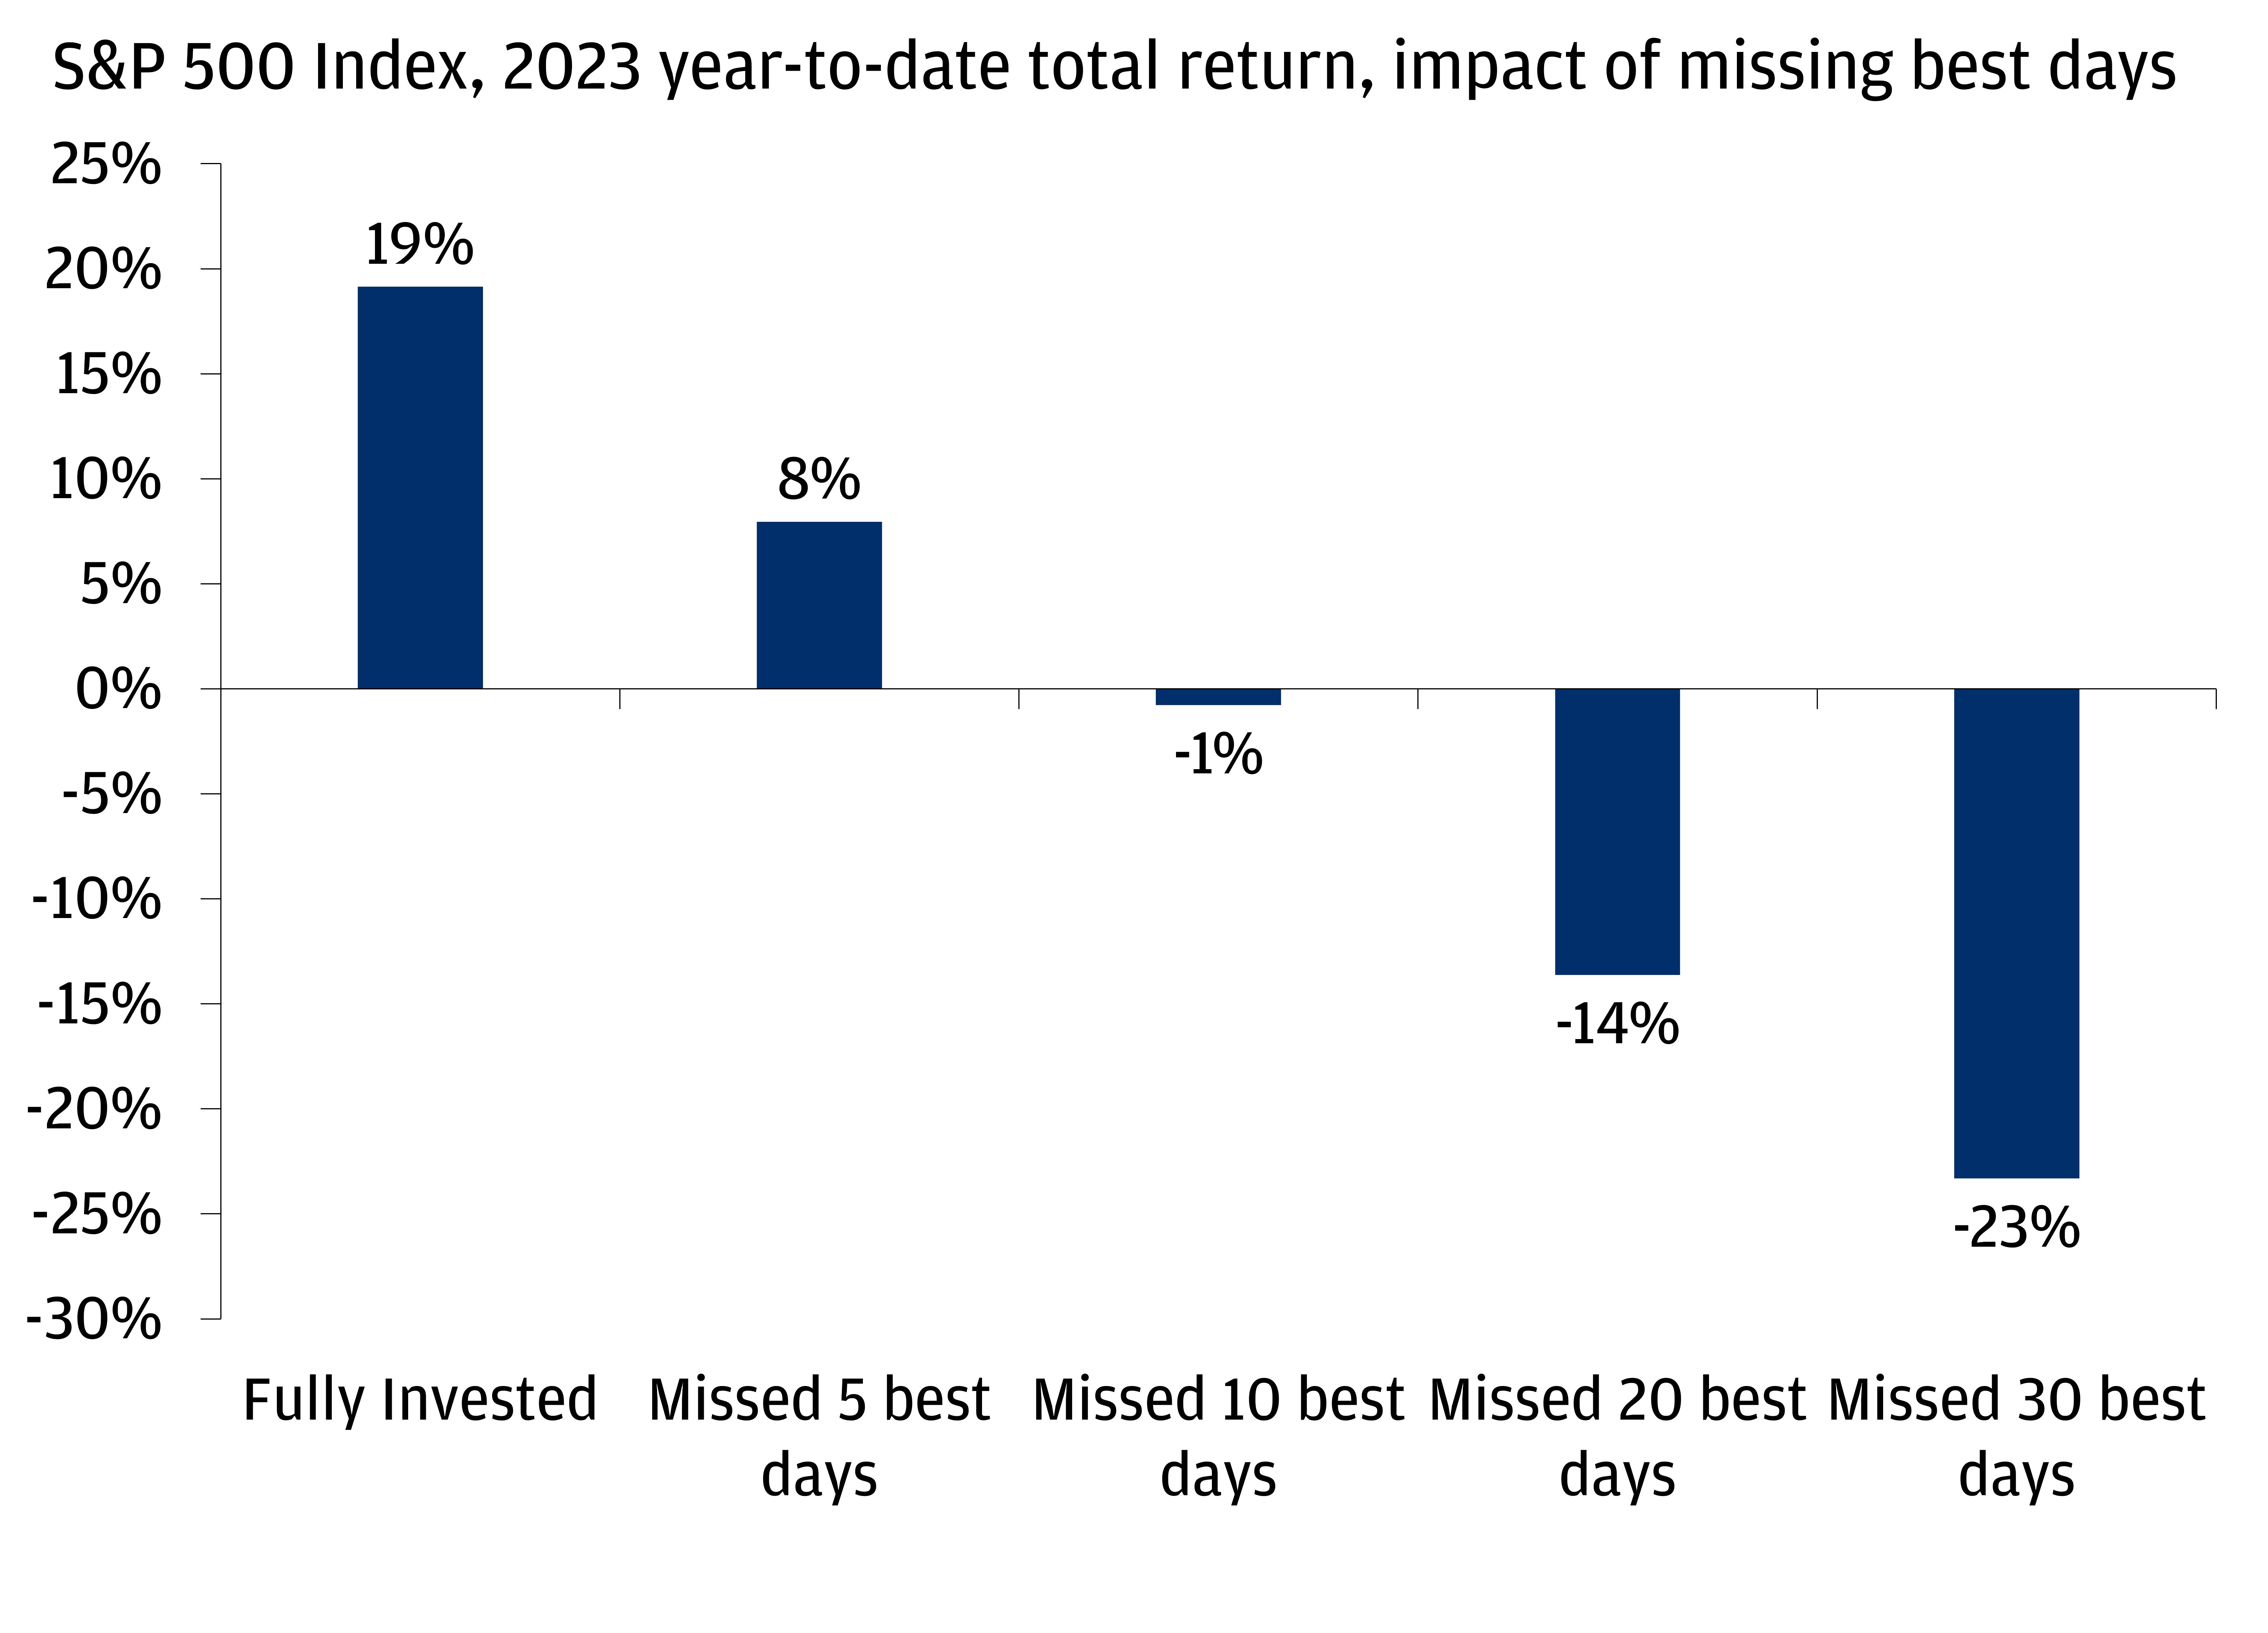 This graph shows the S&P 500 returns during 2023 and the impact of missing the best days.